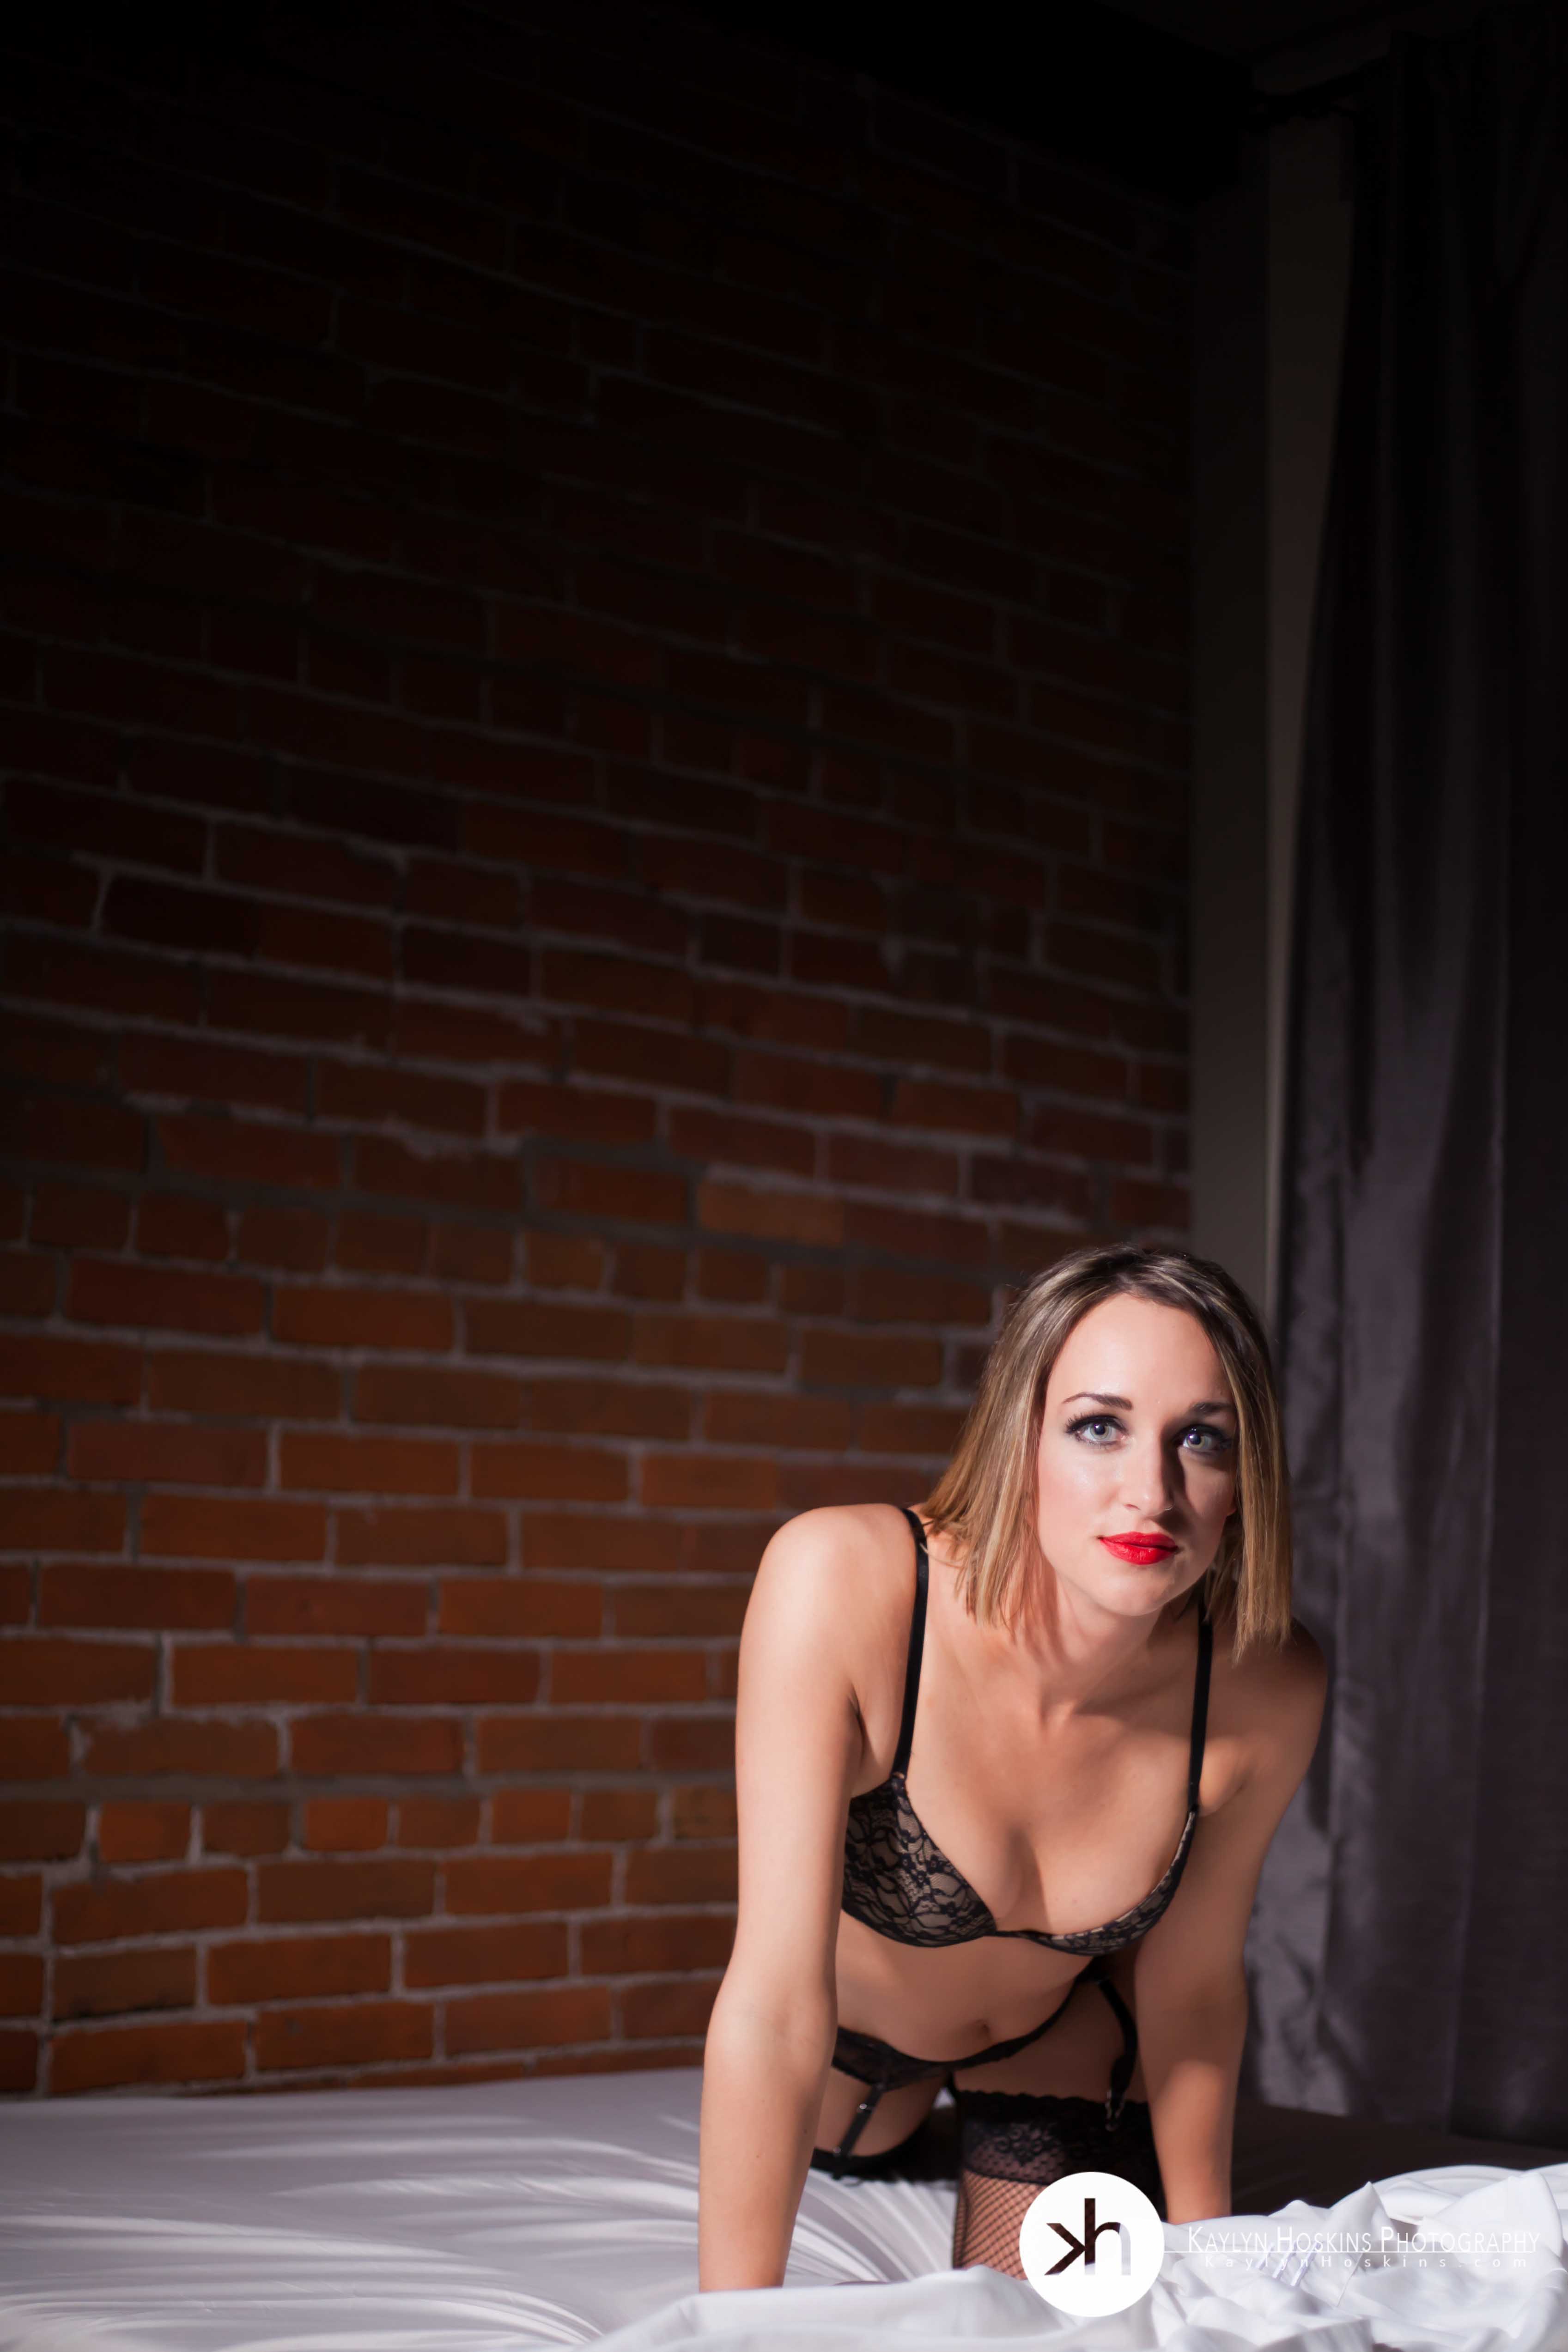 Valentine's boudoir client on bed in red lipstick & lingerie during boudoir session